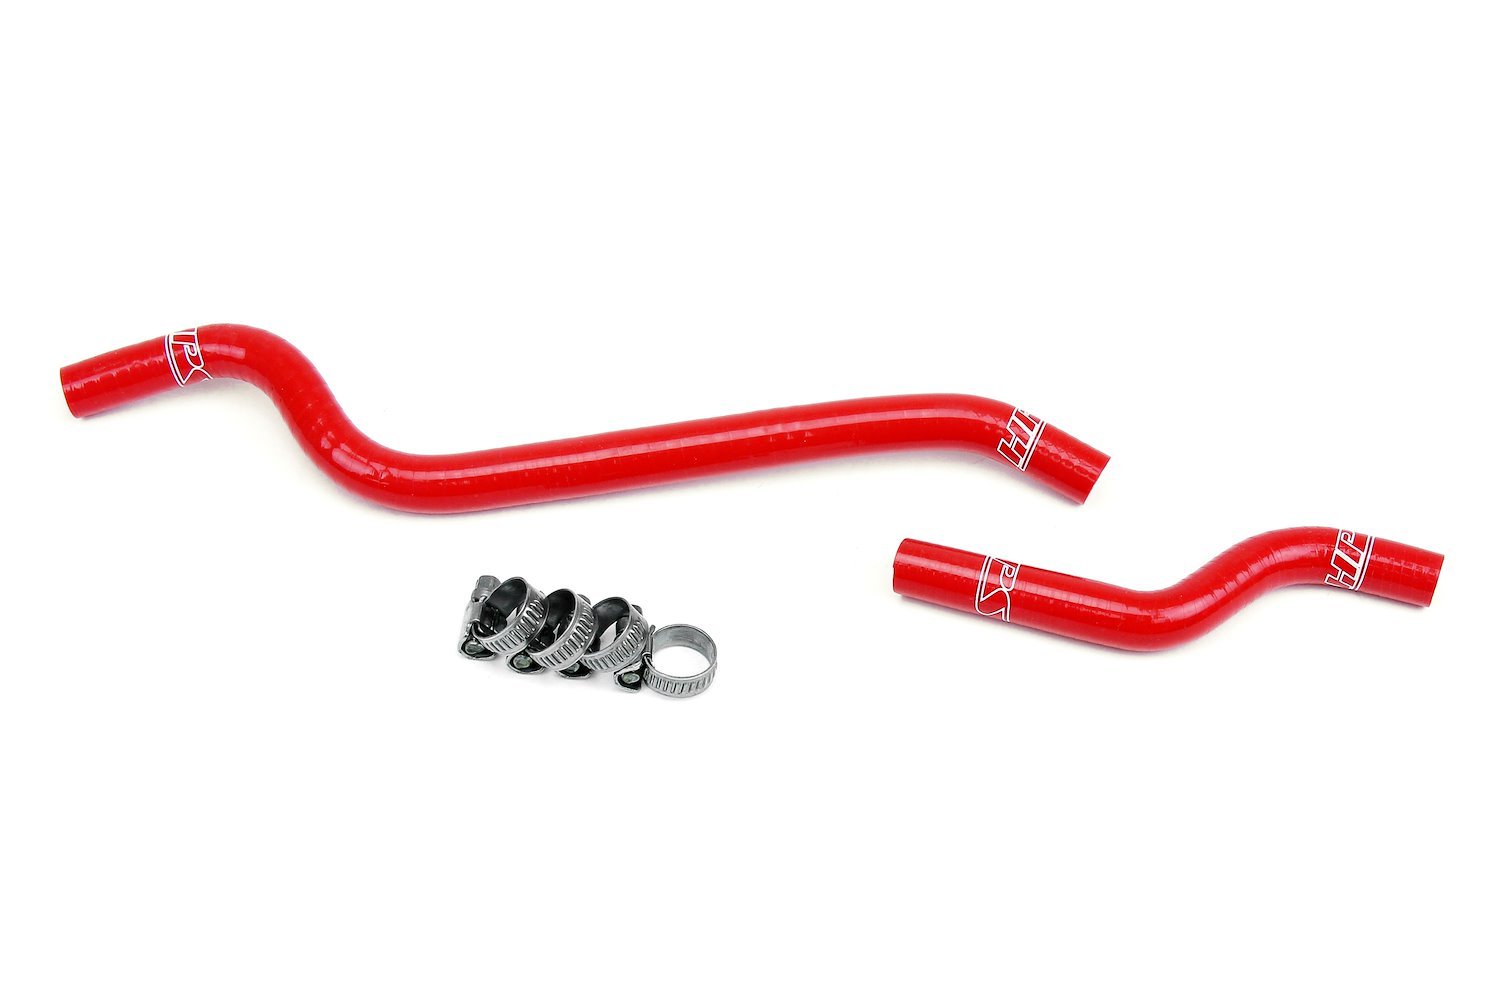 57-1873-RED Throttle Body Coolant Hose Kit, 3-Ply Reinforced Silicone, Replaces Rubber Throttle Body Coolant Hoses